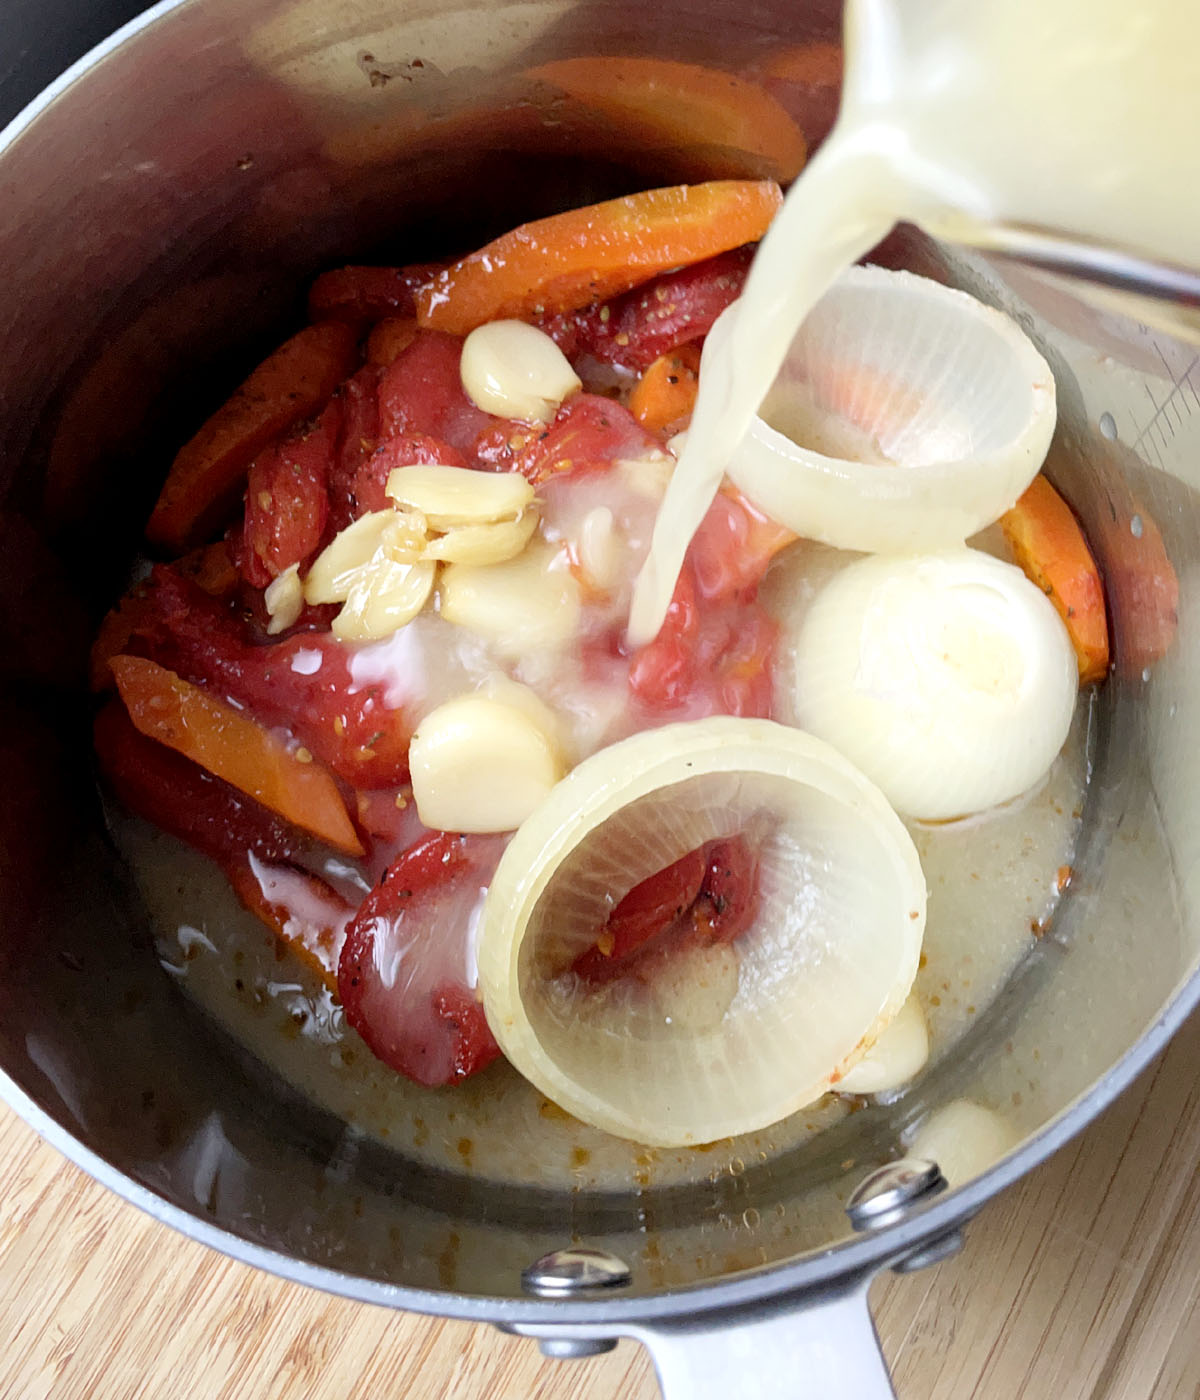 Broth being poured into a pot containing tomatoes, onions, garlic, an carrots.